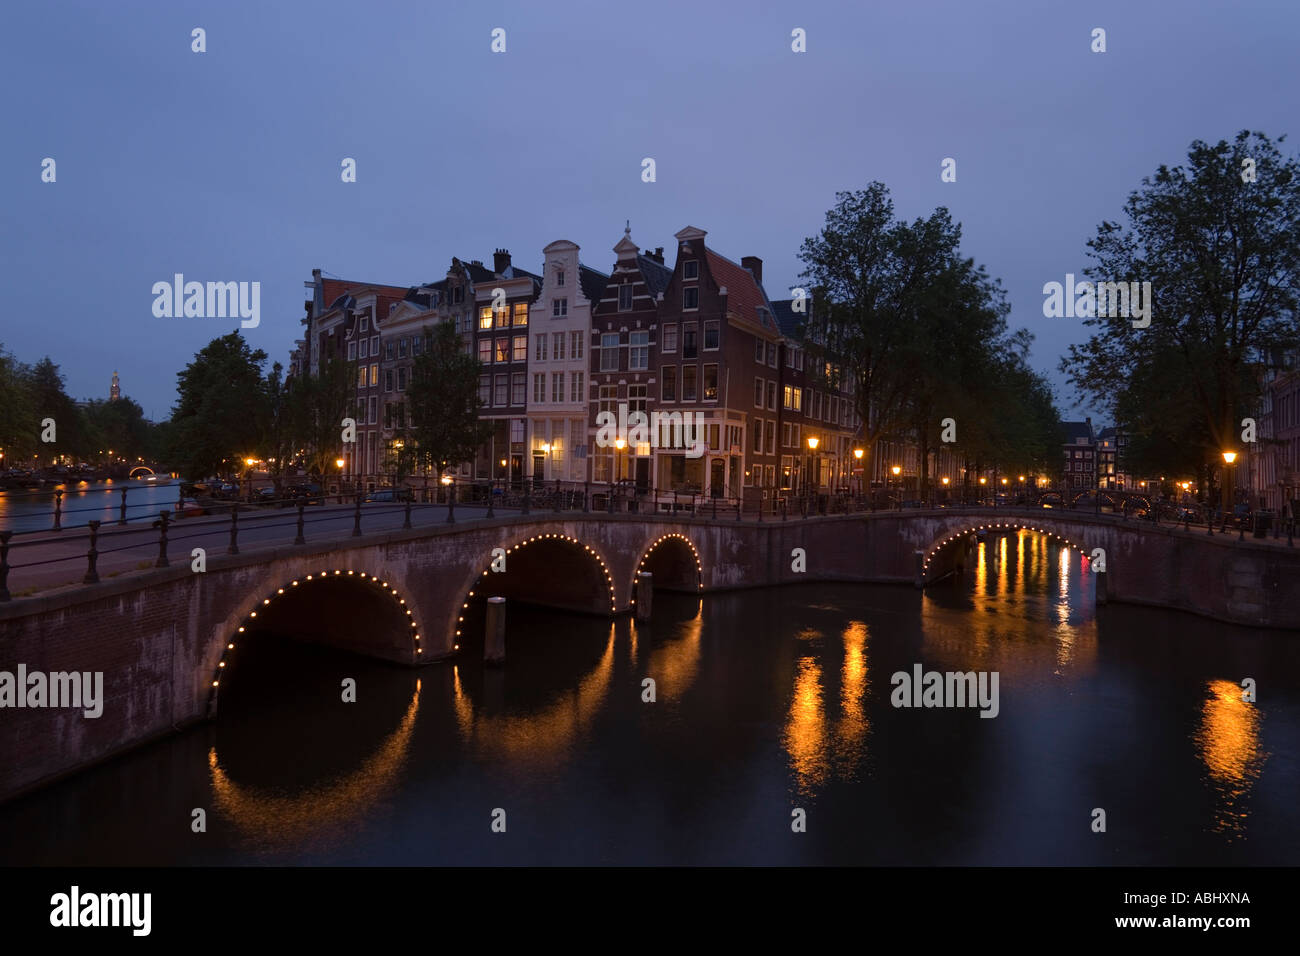 View over illuminated bridge to gabled houses in the evening Keizersgracht and Leidsegracht Amsterdam Holland Netherlands Stock Photo